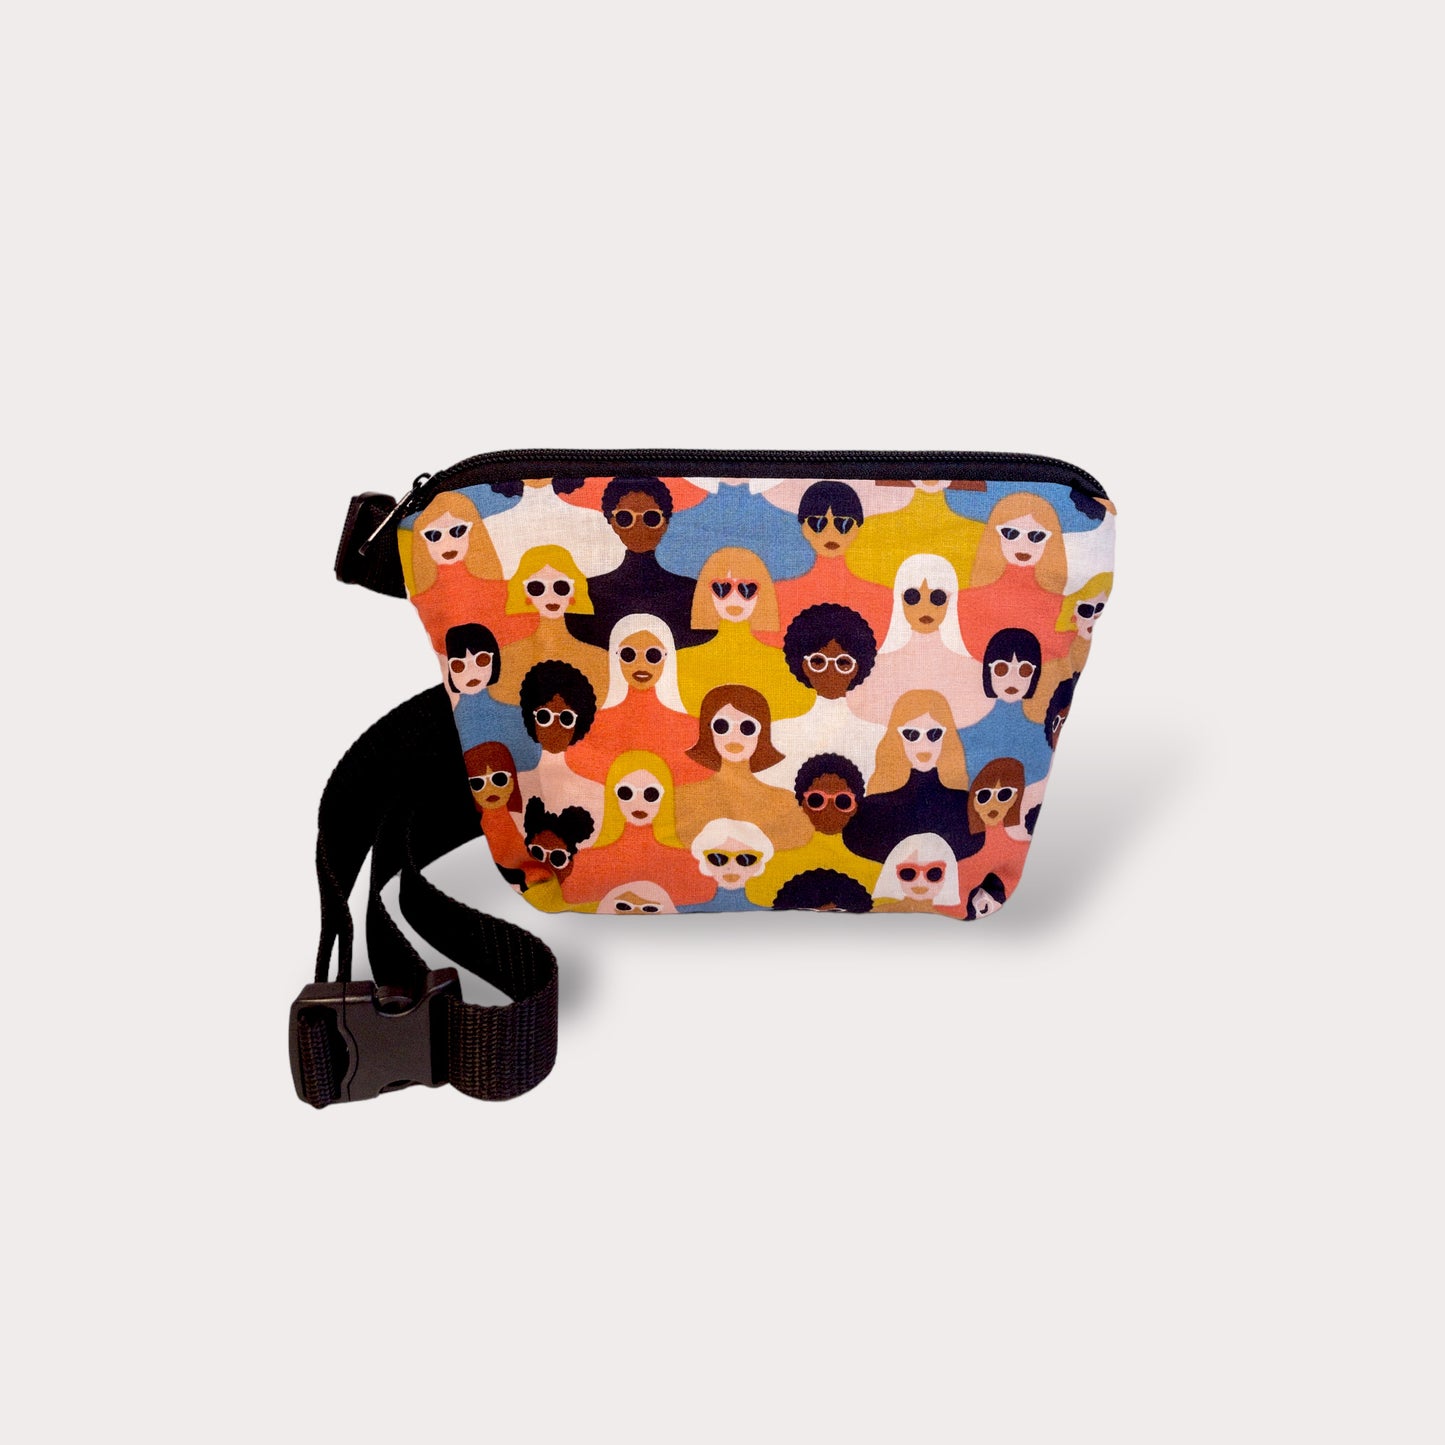 Small Hip Bag .  All the Women. Fabric